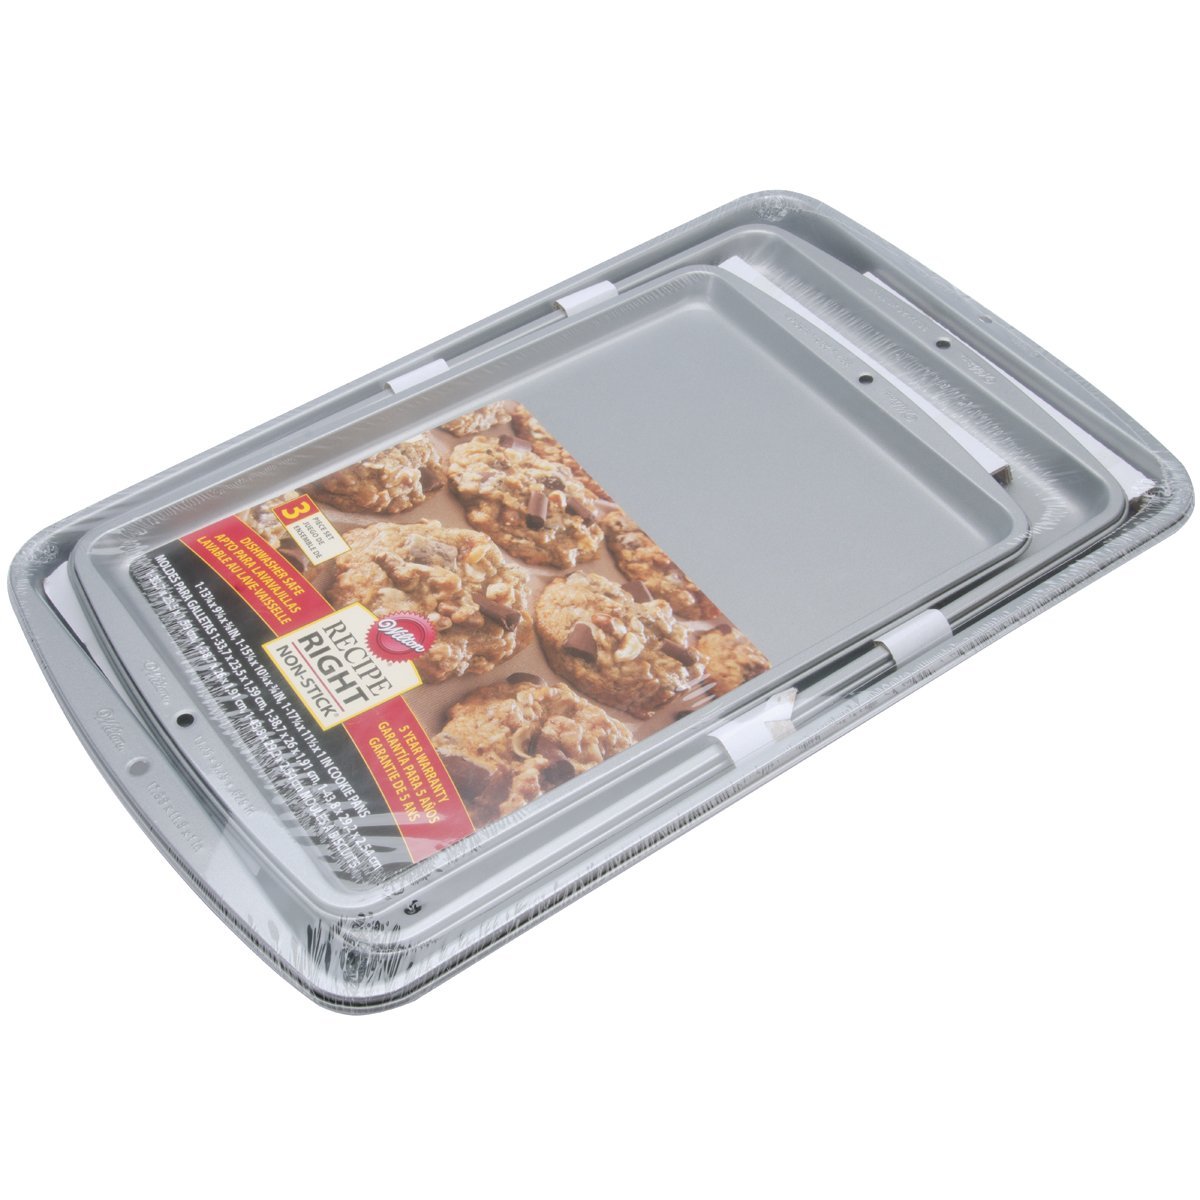 Wilton Recipe Right Non-Stick Baking Pan with Lid, 9 x 13-Inch, Steel